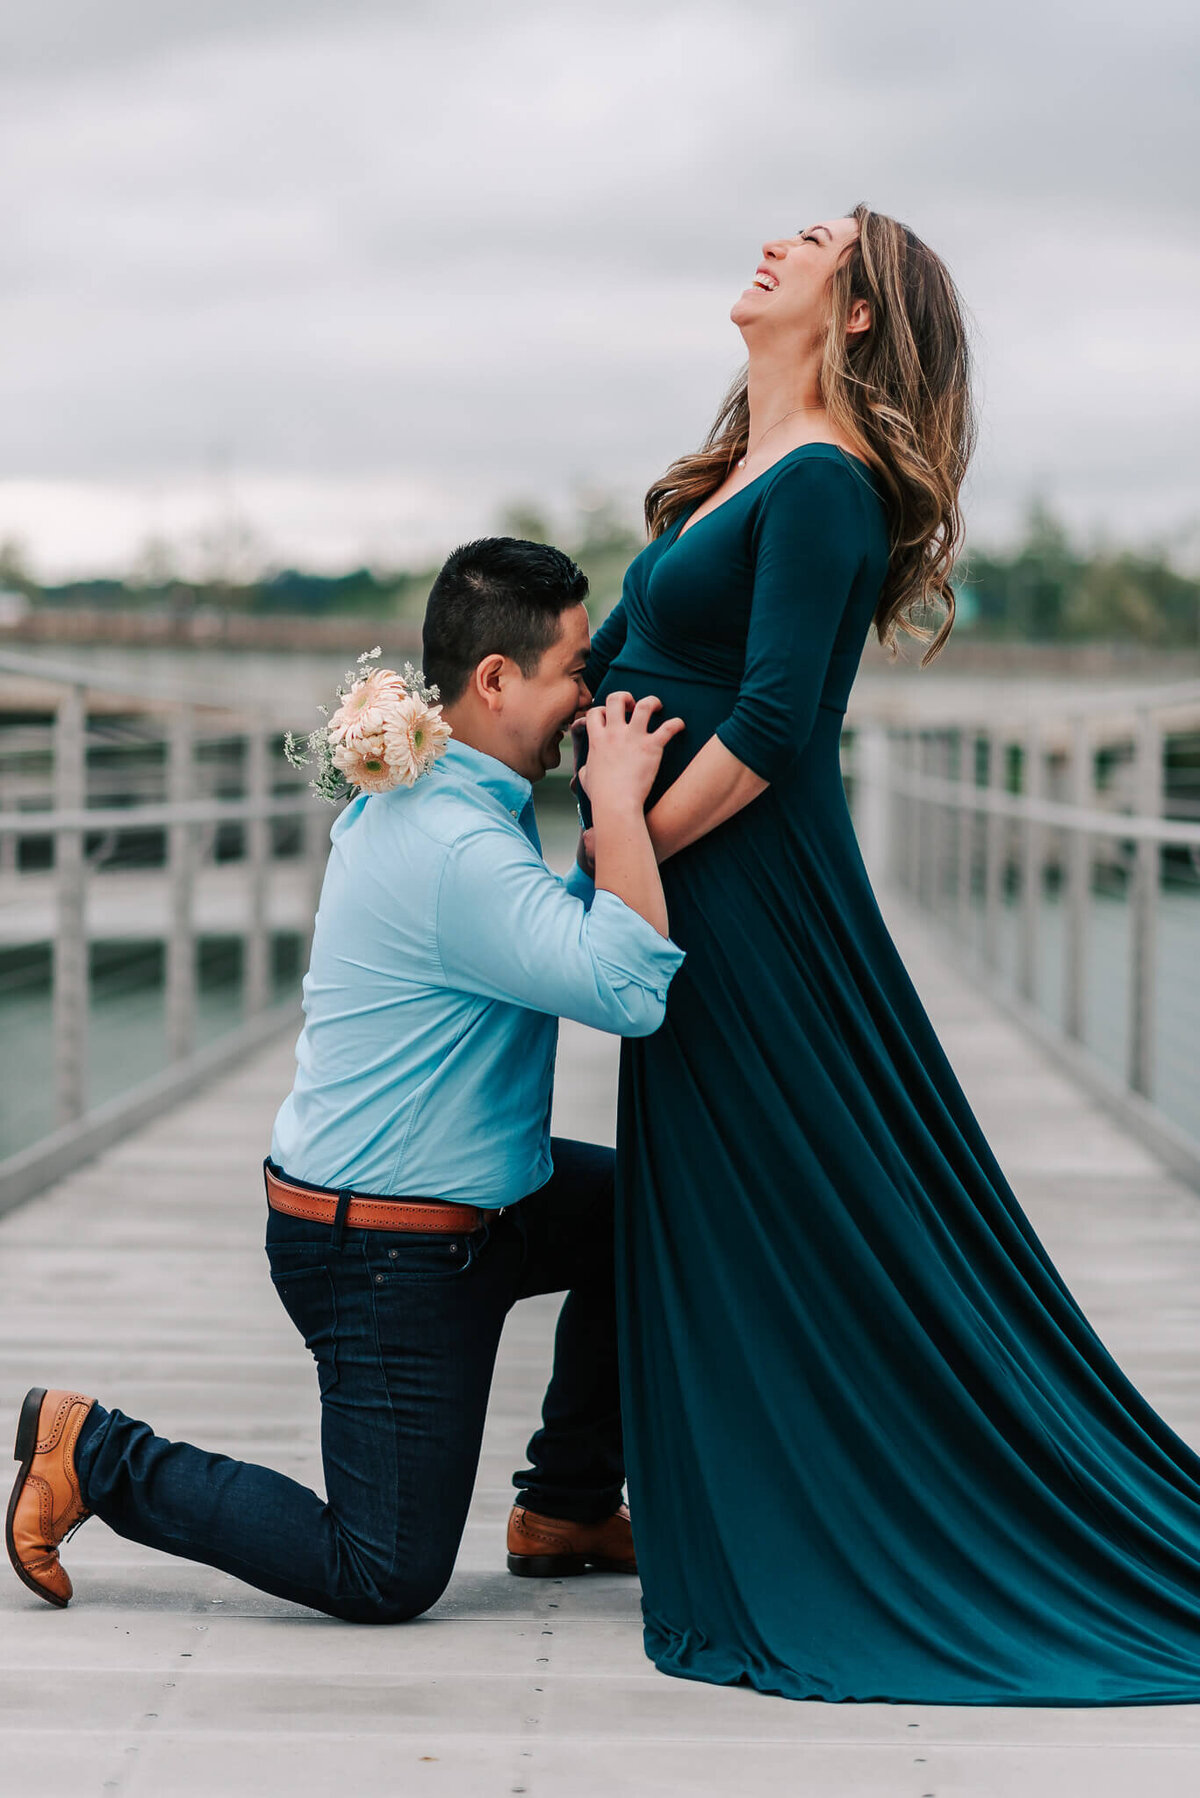 A joyful moment shared by a couple during their maternity session by Denise Van, a northern virginia maternity photographer